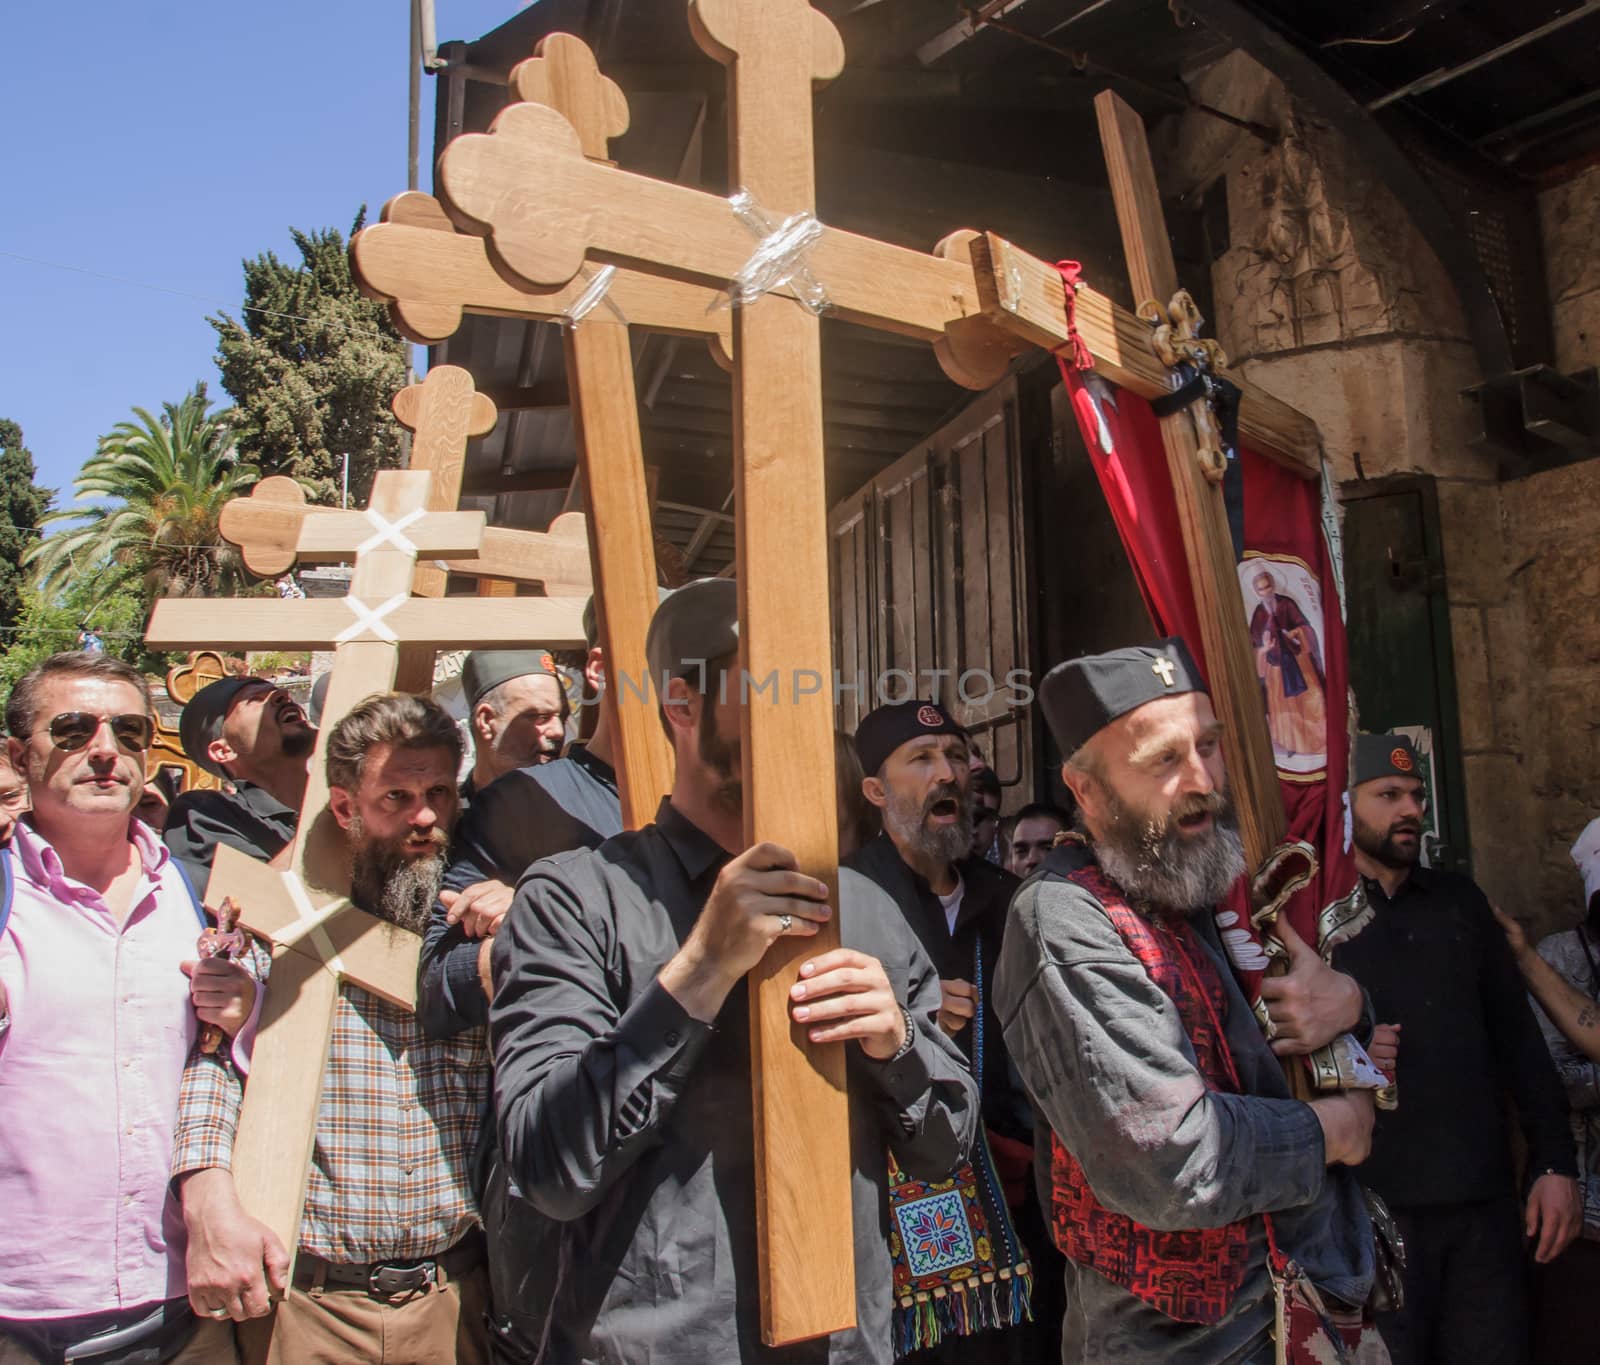 JERUSALEM - APRIL 18, 2014: Pilgrims from all over the world commemorating the crucifixion of Jesus Christ by carrying a cross along via dolorosa, on good Friday, in the old city of Jerusalem, Israel